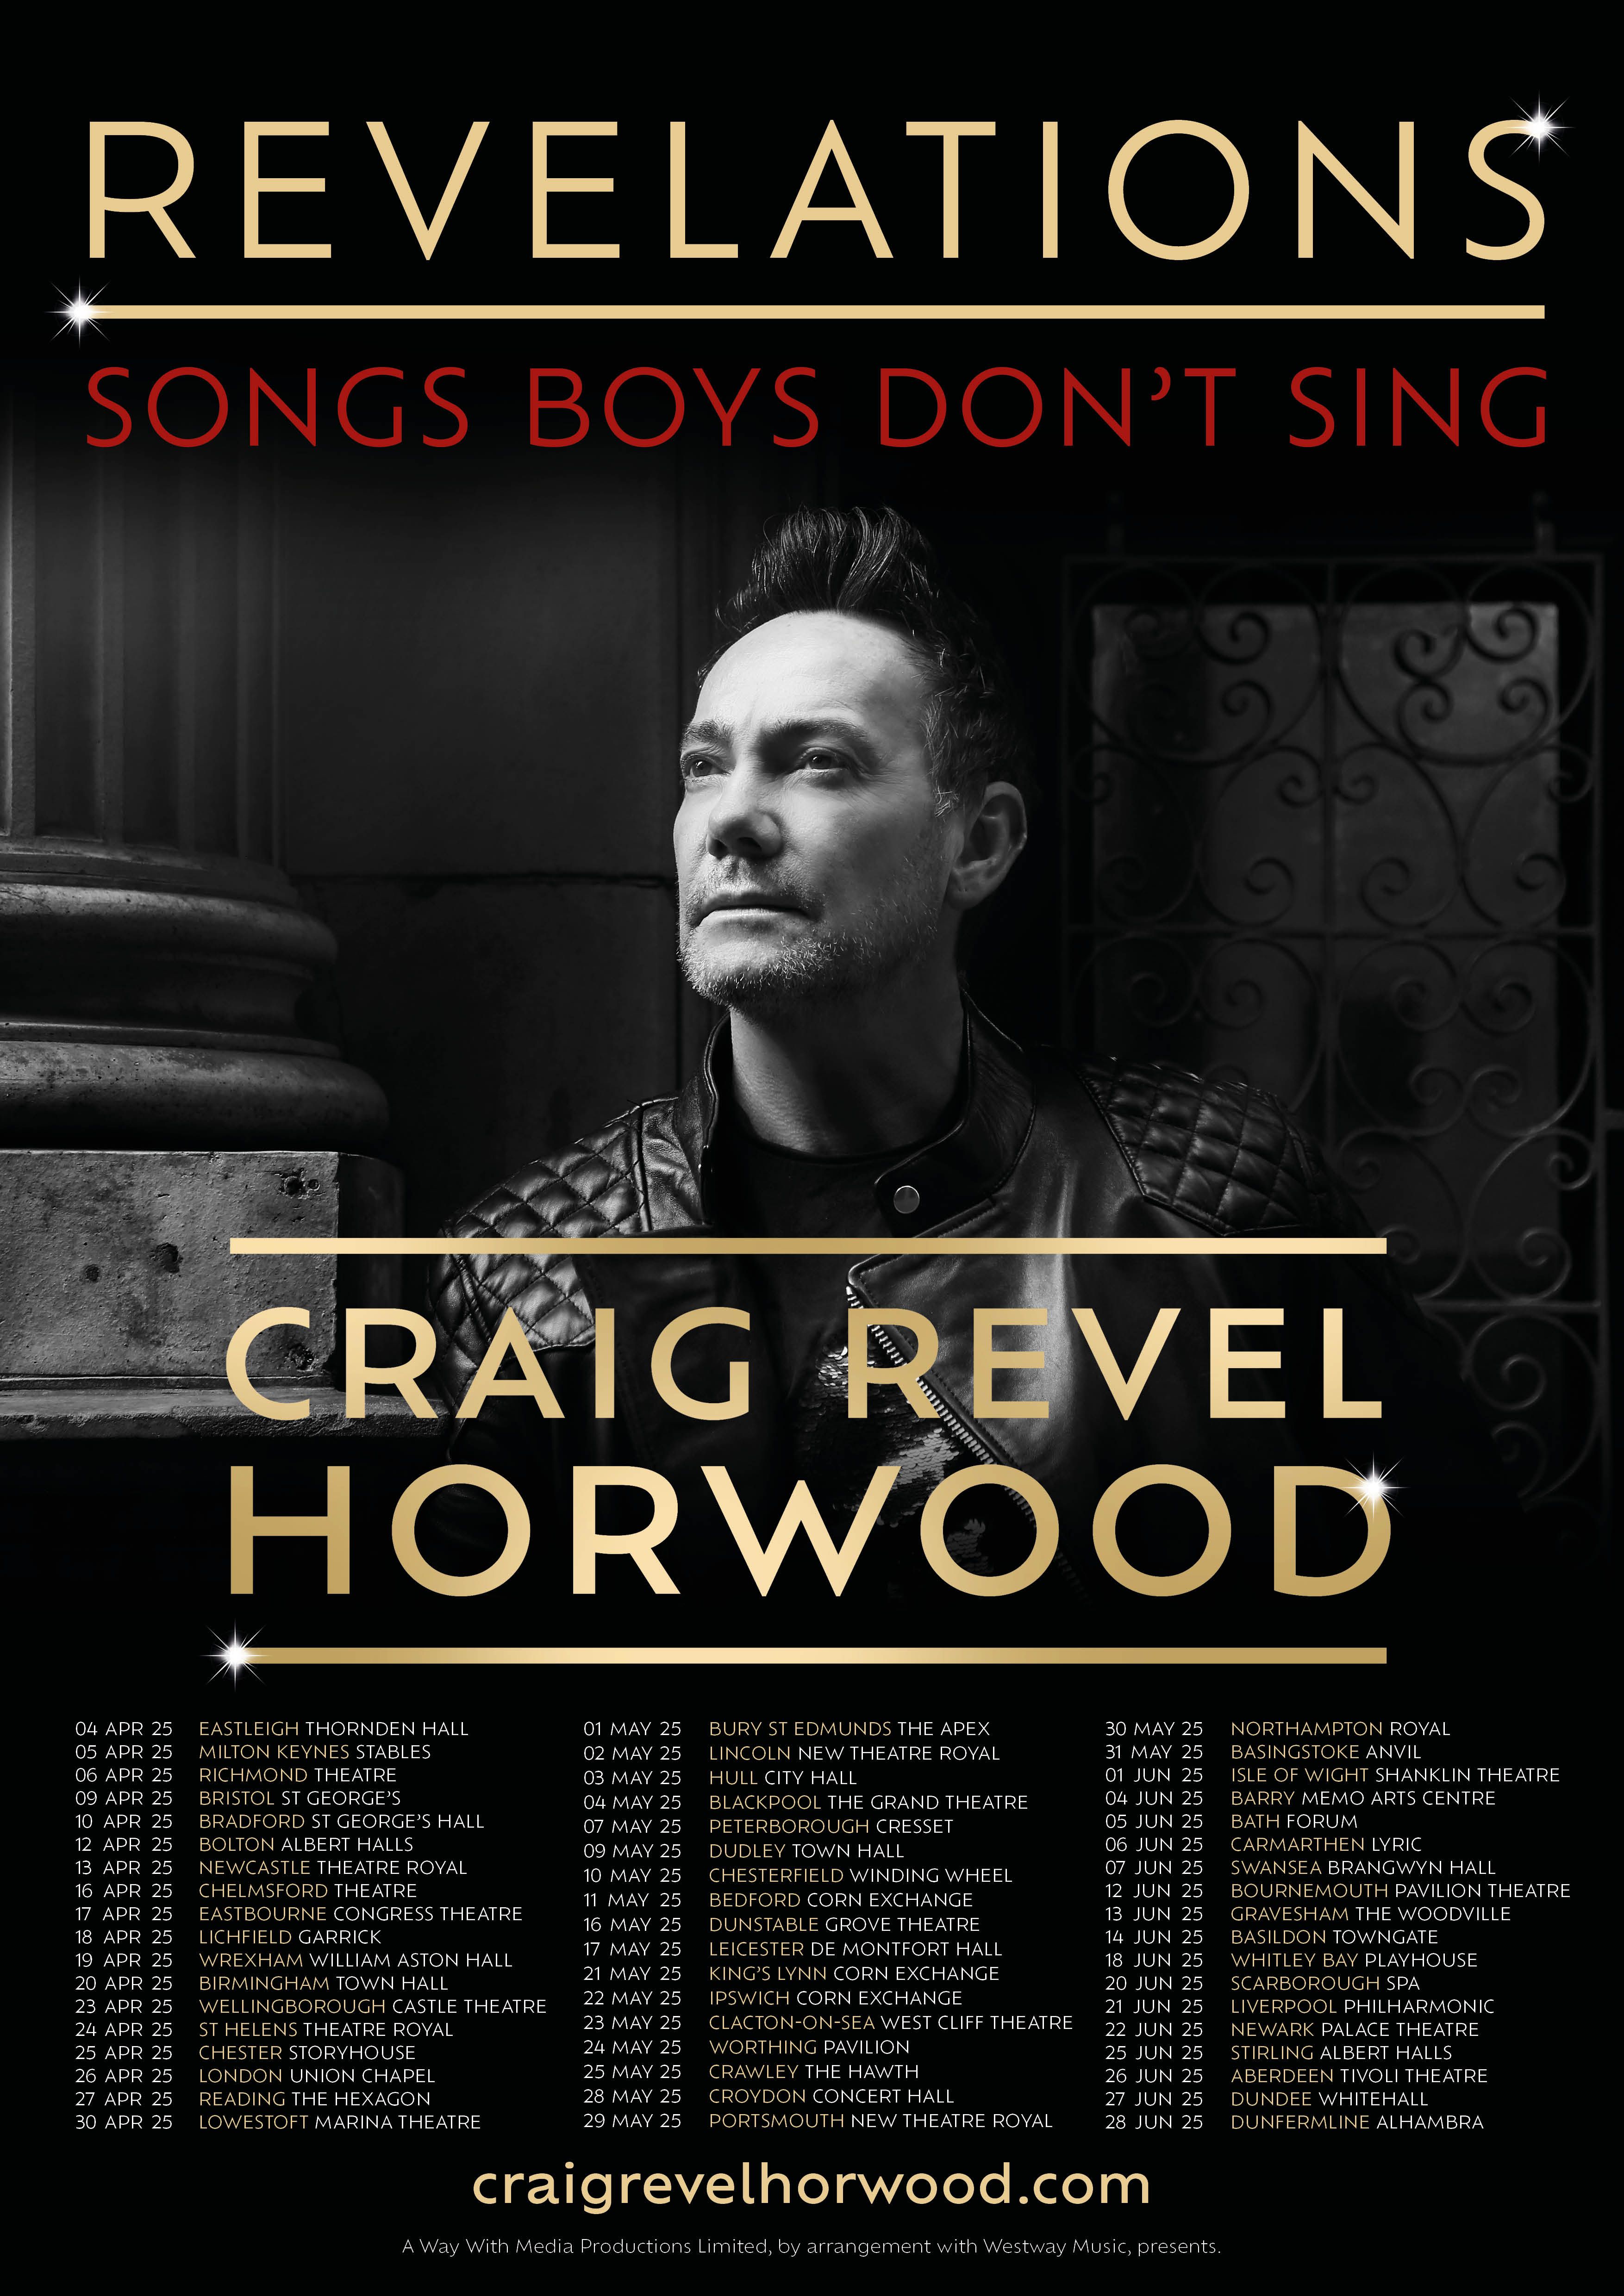 Craig Revel Horwood is going on a tour next year to perform songs from his debut album. 